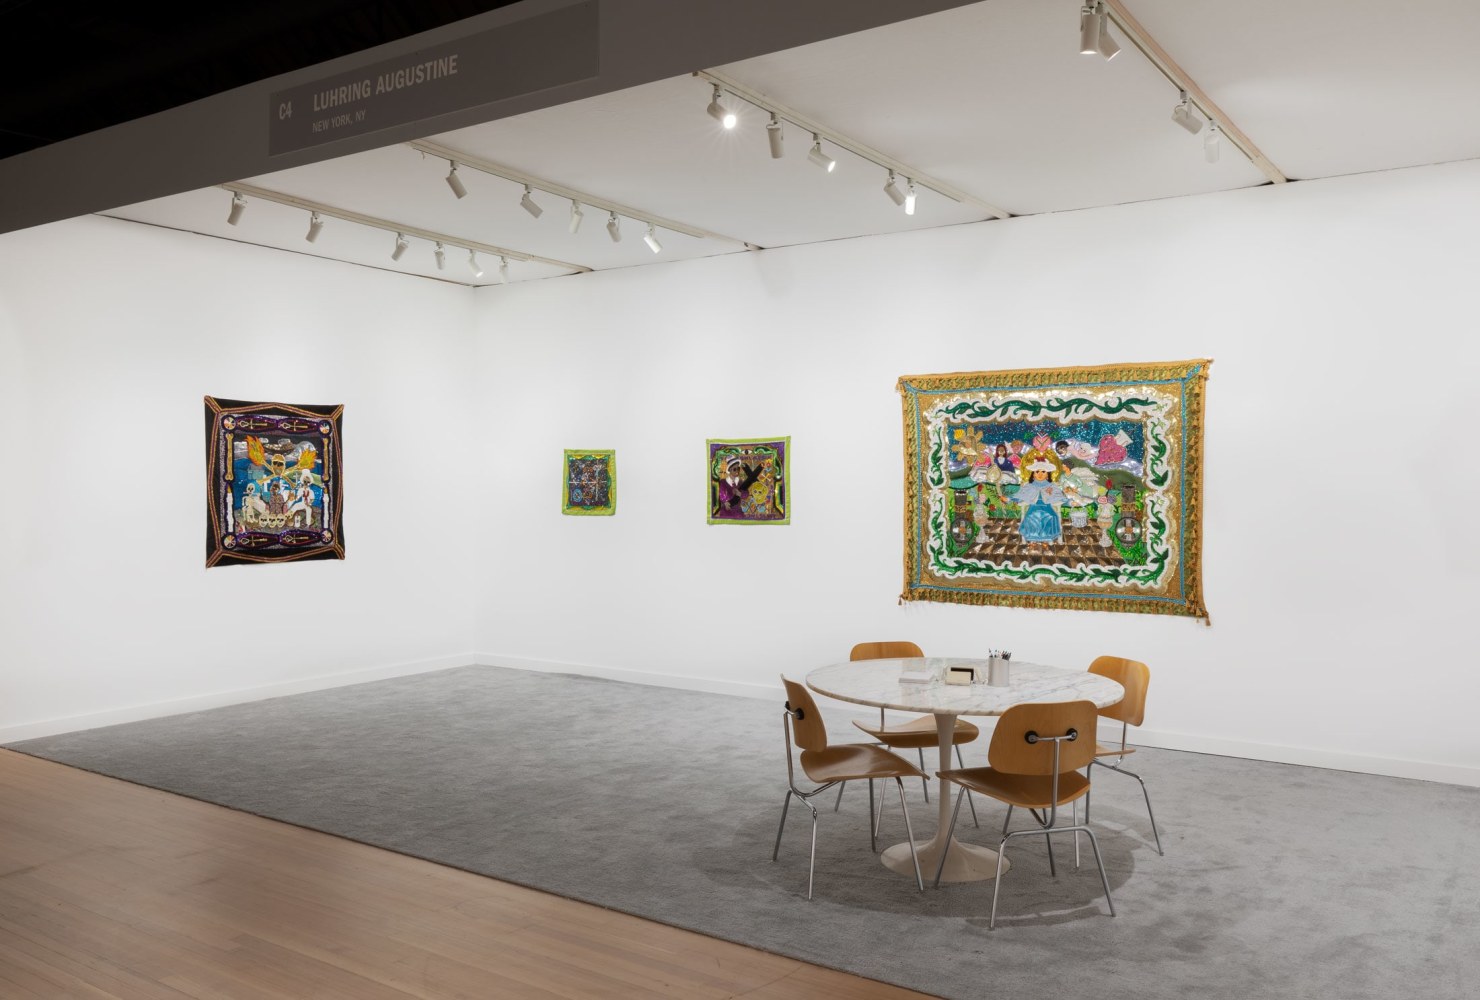 Luhring Augustine
ADAA | The Art Show, Booth C4
Installation view
2021
Photo: Dawn Blackman